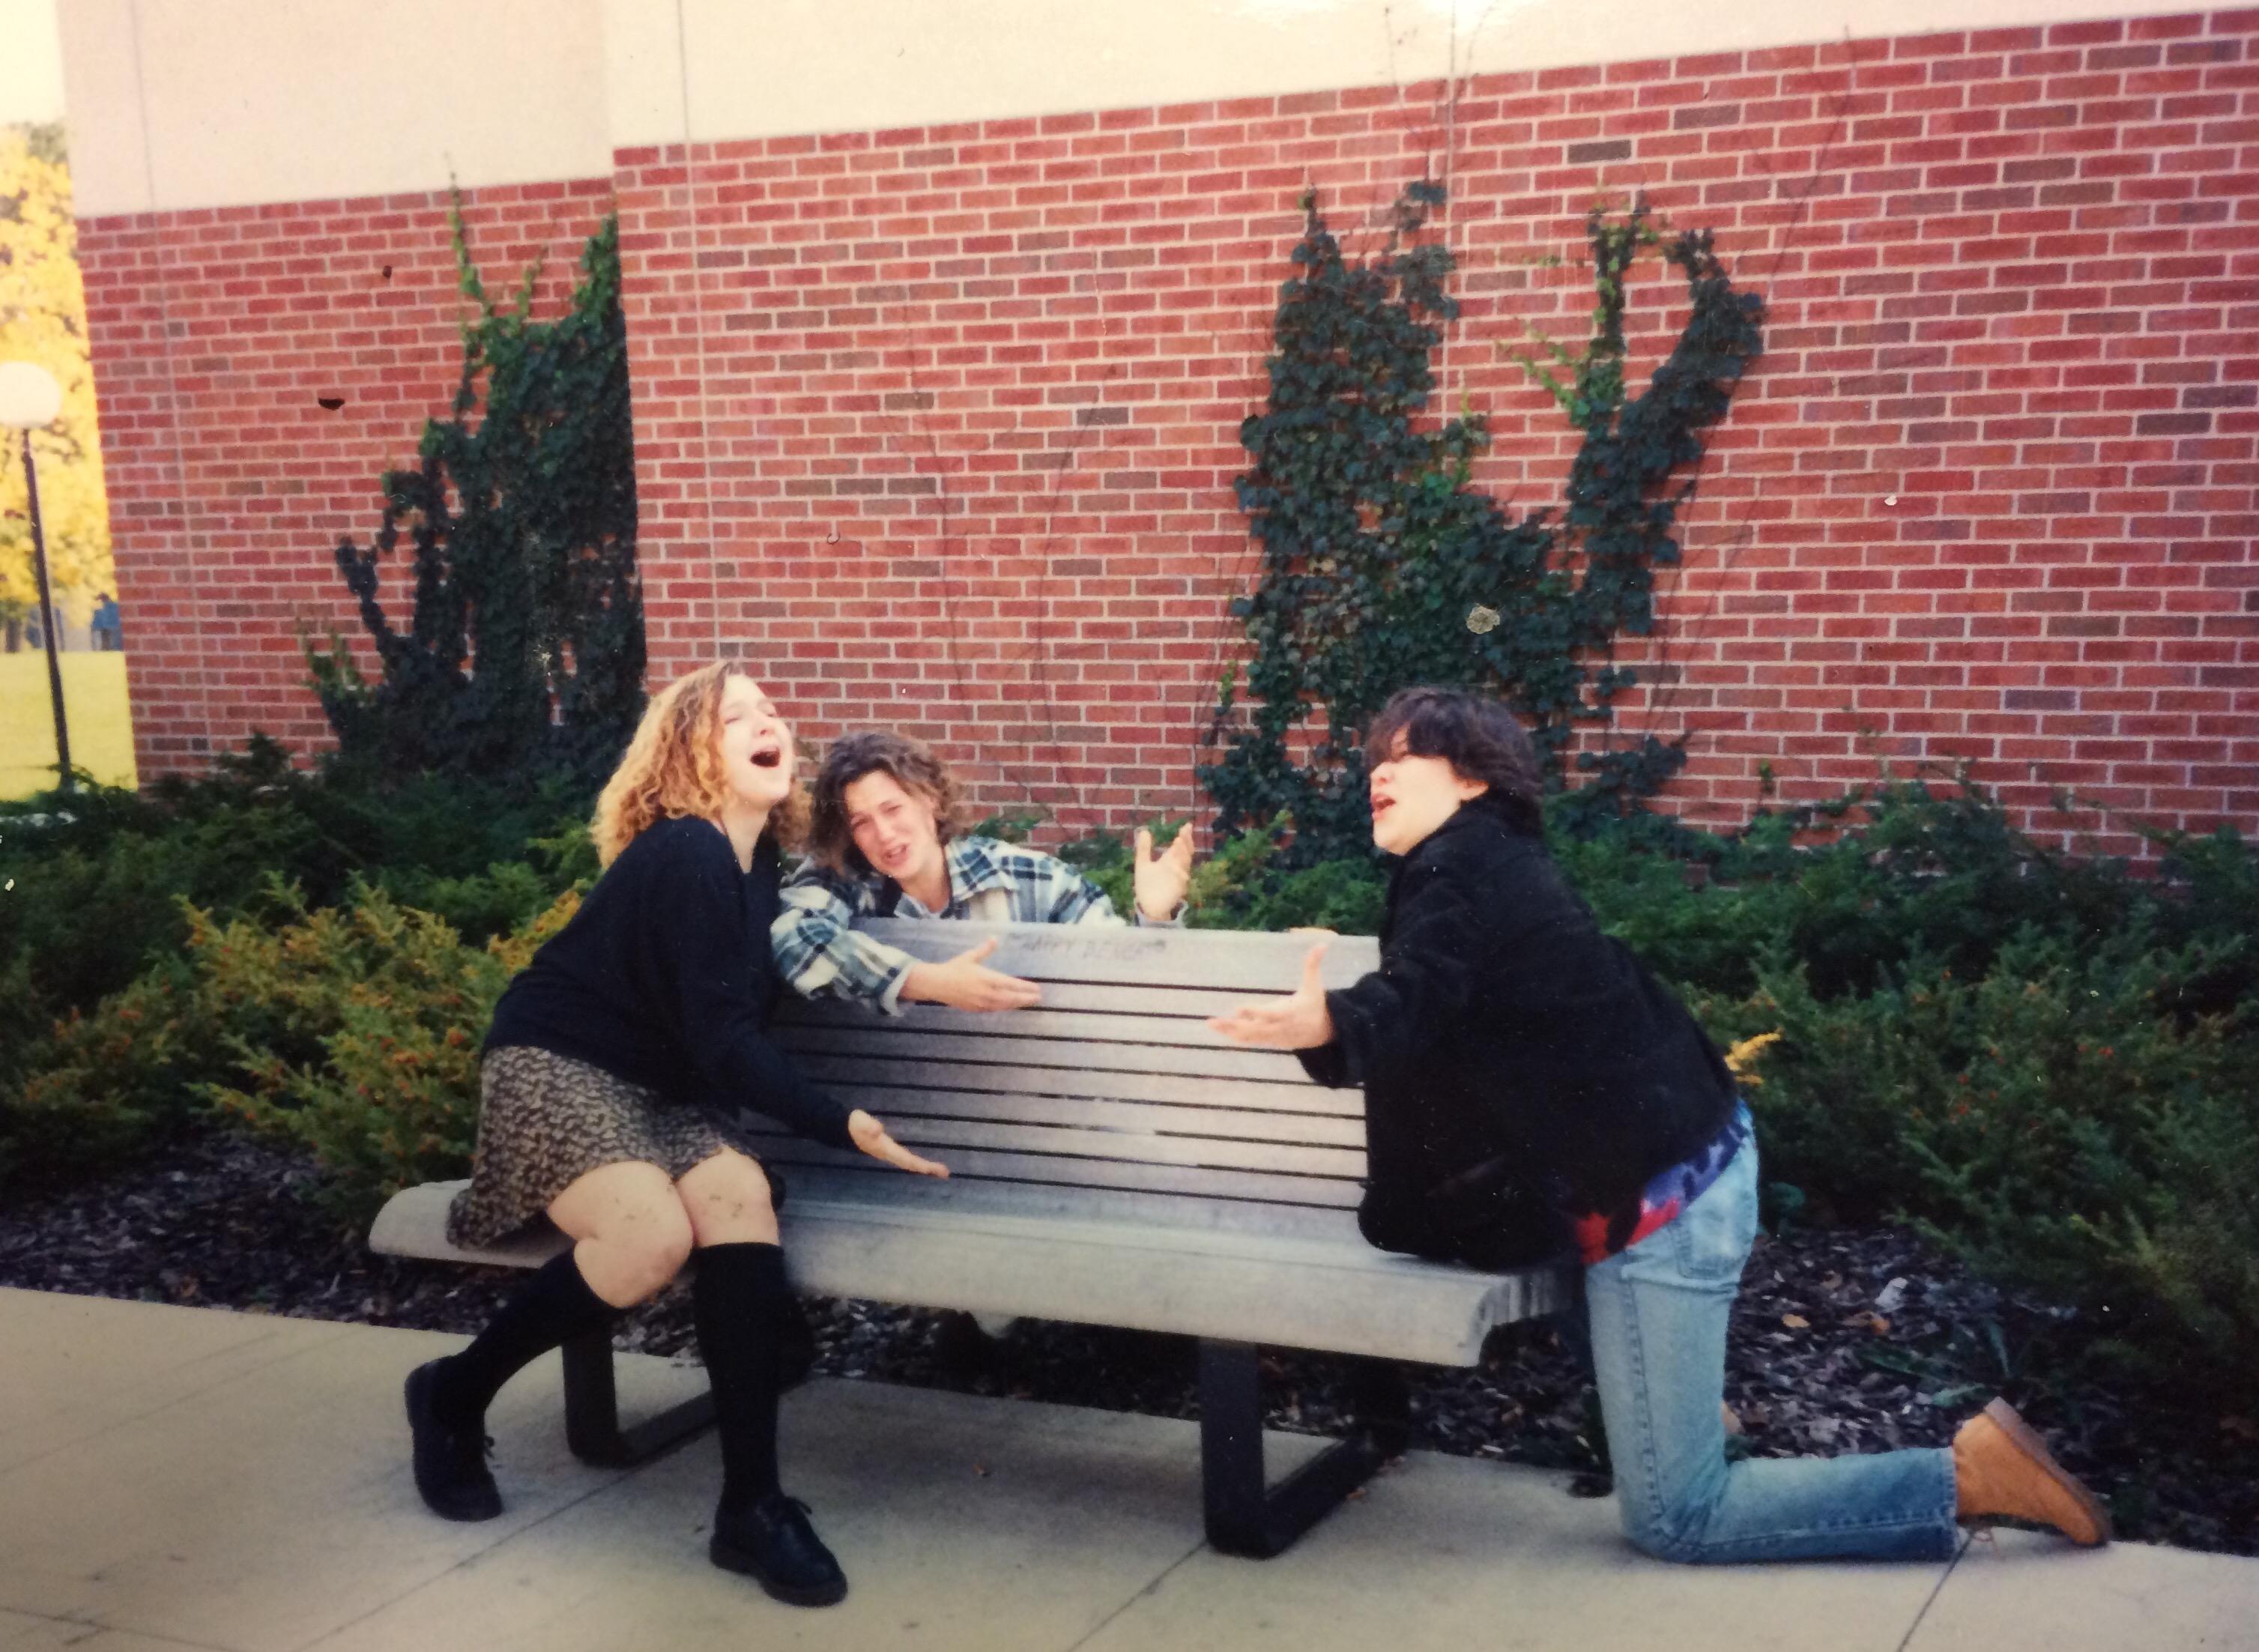 Three young women singing and gesturing as they sit on and around a bench near the Student Center on campus.